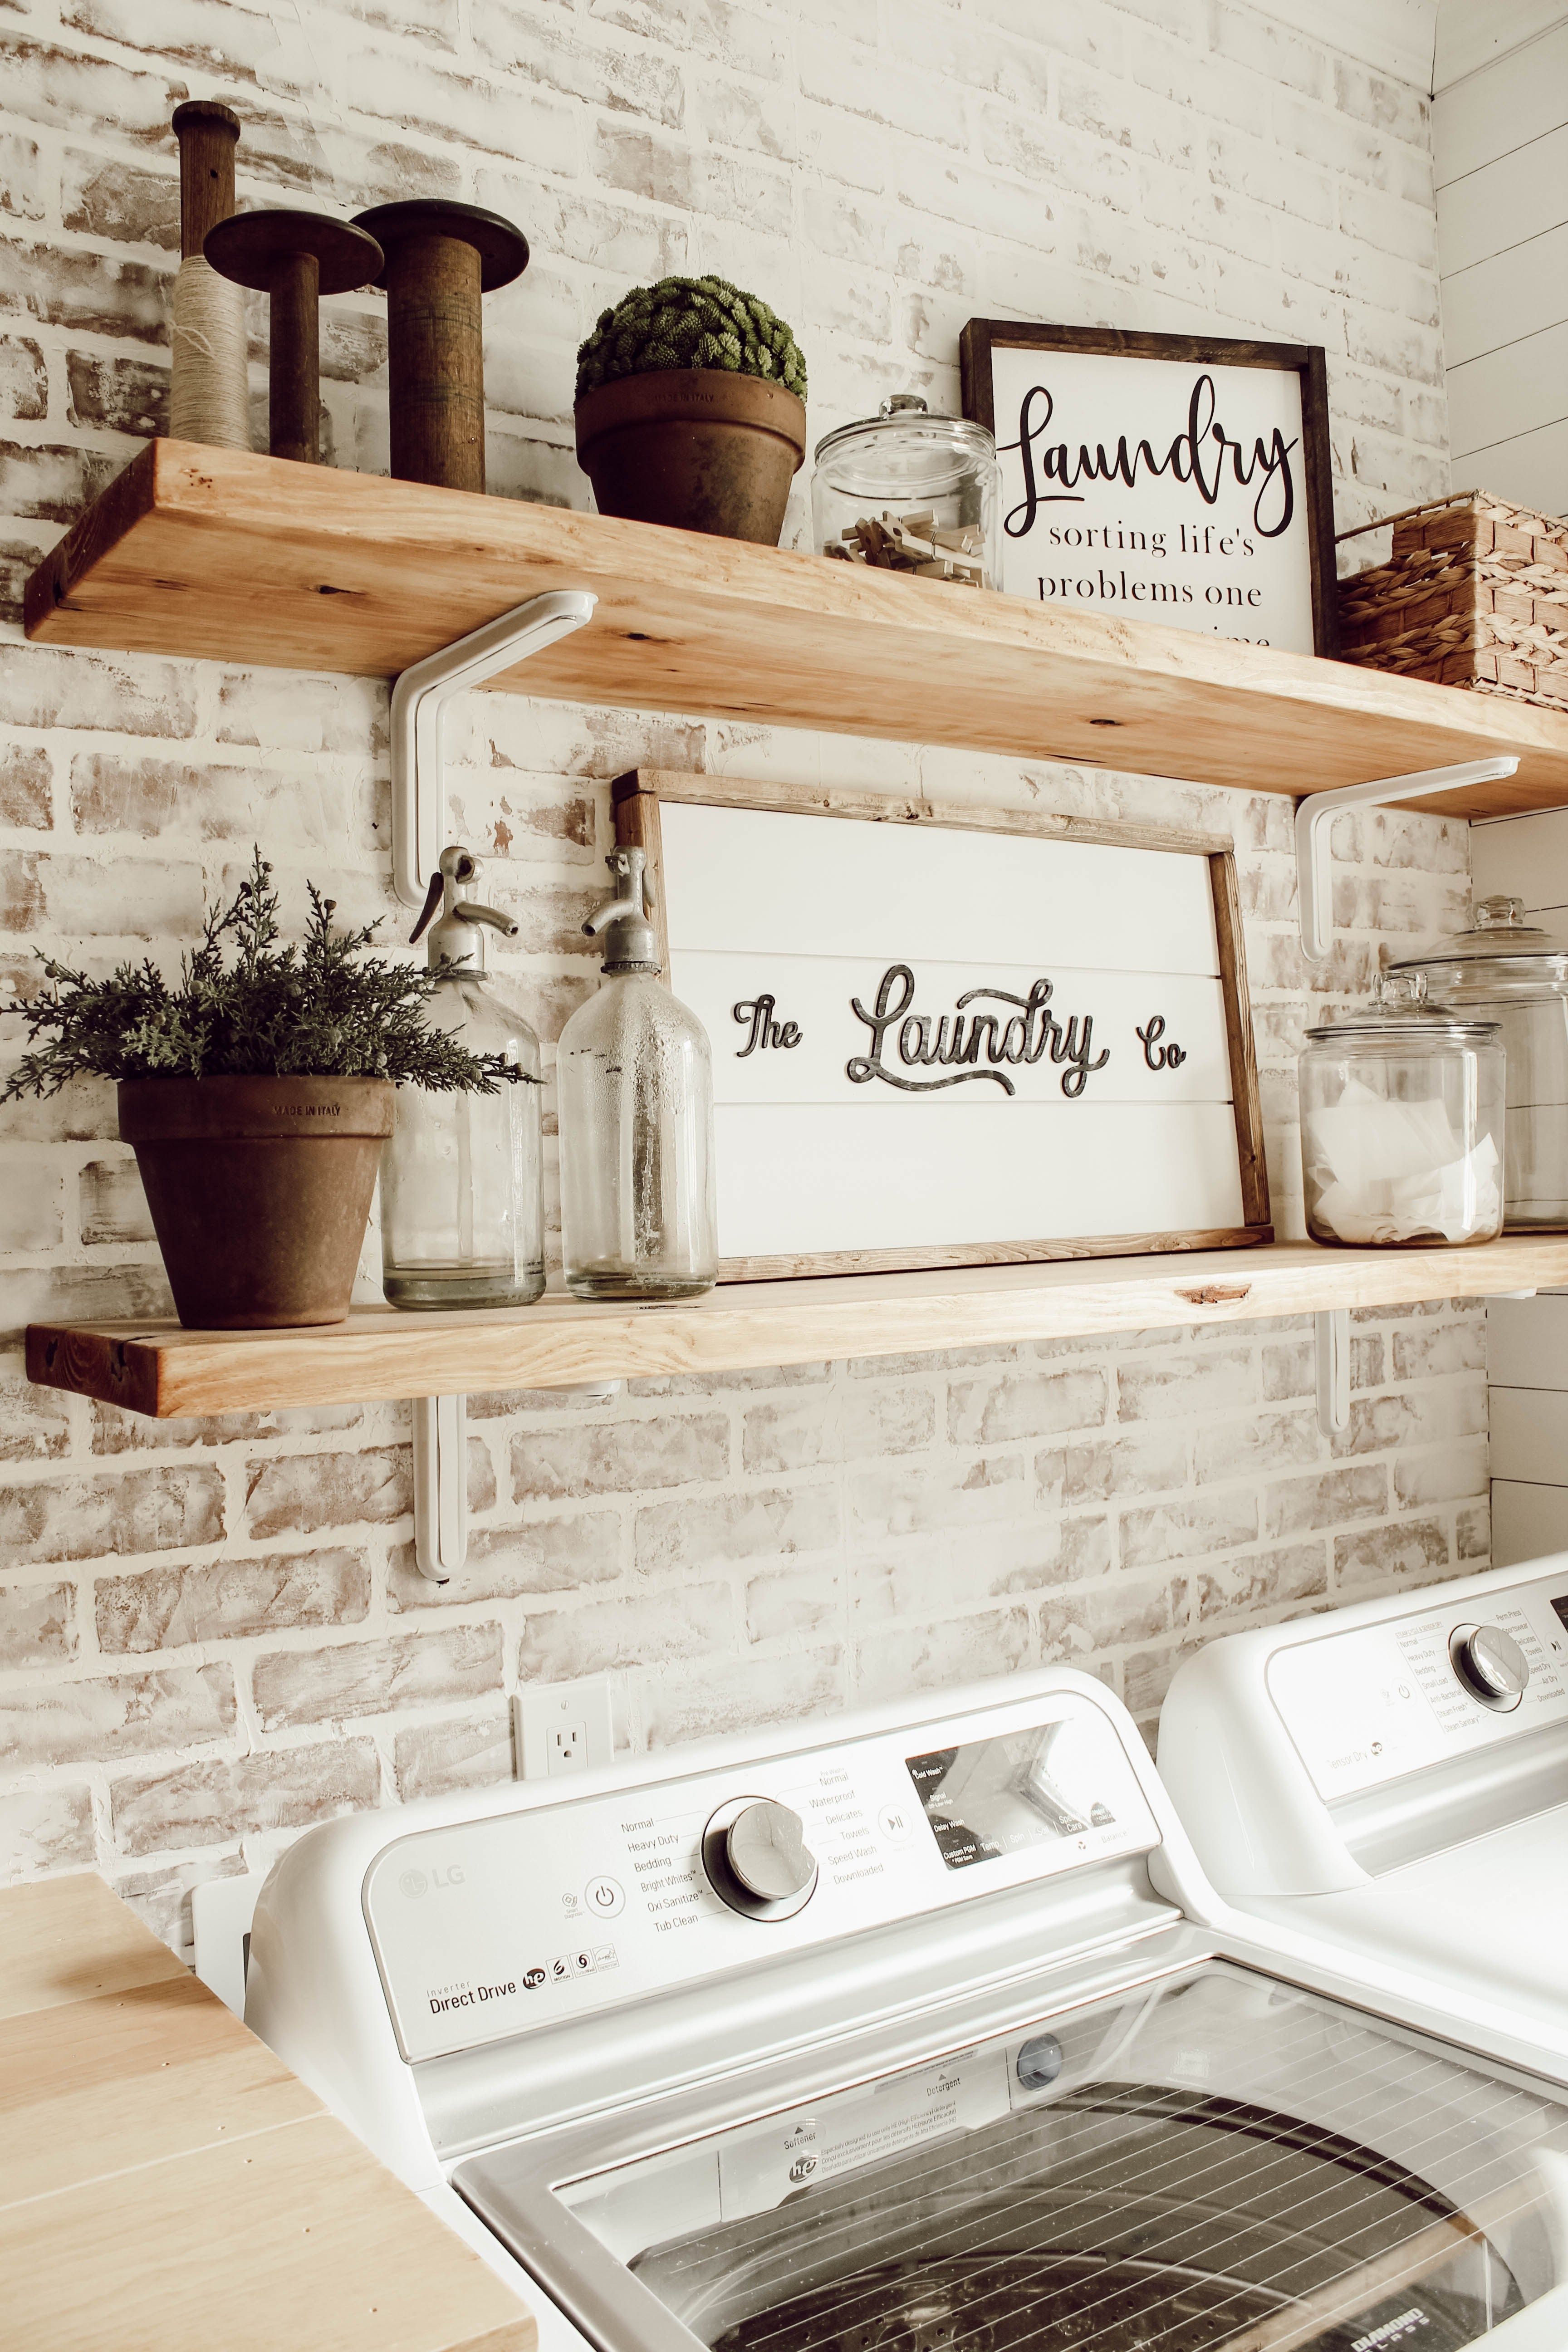 DIY Faux Brick Wall in Laundry Room - Beauty For Ashes - DIY Faux Brick Wall in Laundry Room - Beauty For Ashes -   20 diy Kitchen wall ideas